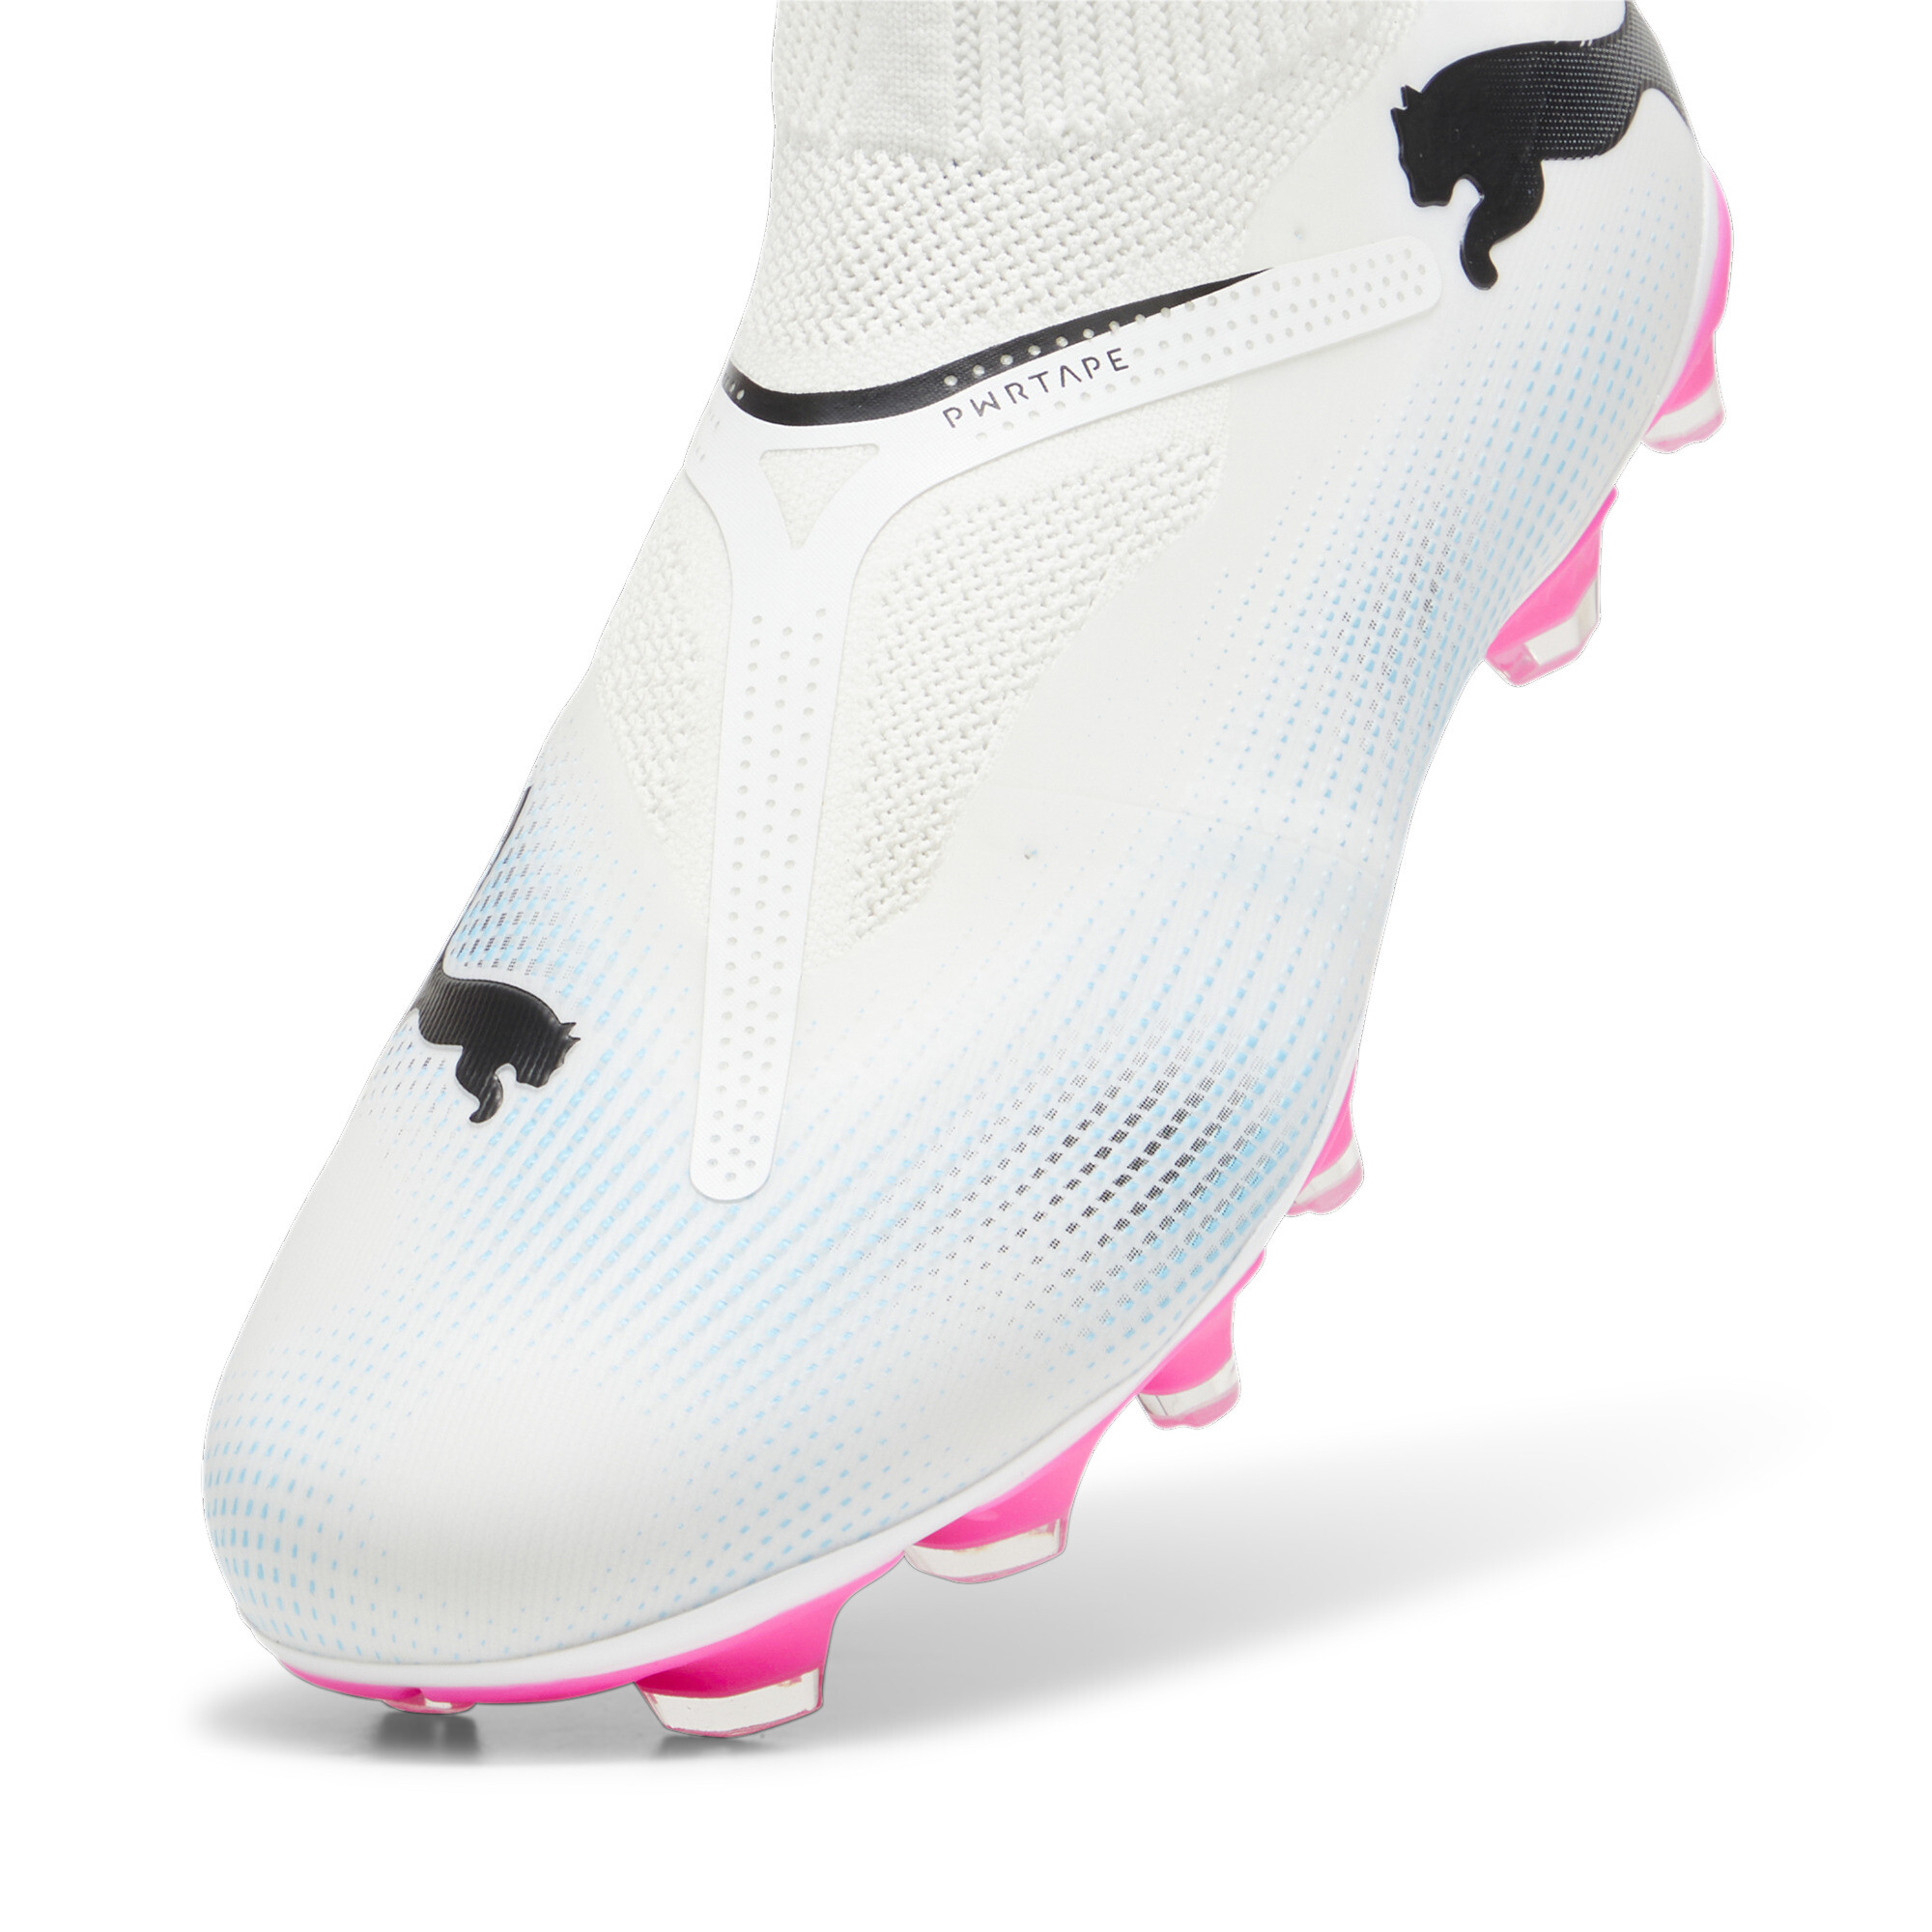 Men's PUMA FUTURE 7 MATCH FG/AG Laceless Football Boots In White/Pink, Size EU 42.5